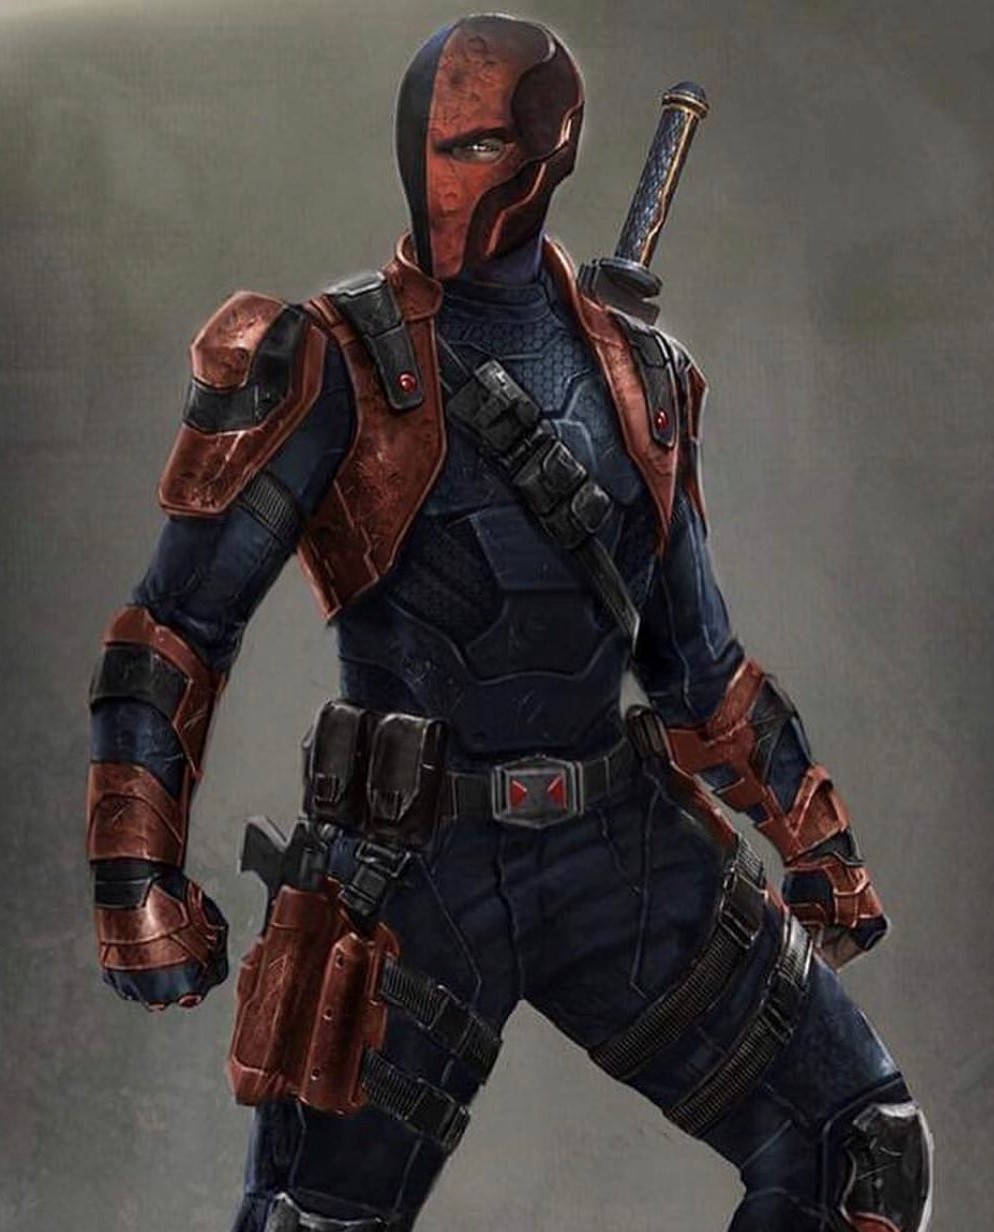 Deathstroke, DC Extended Universe Wiki